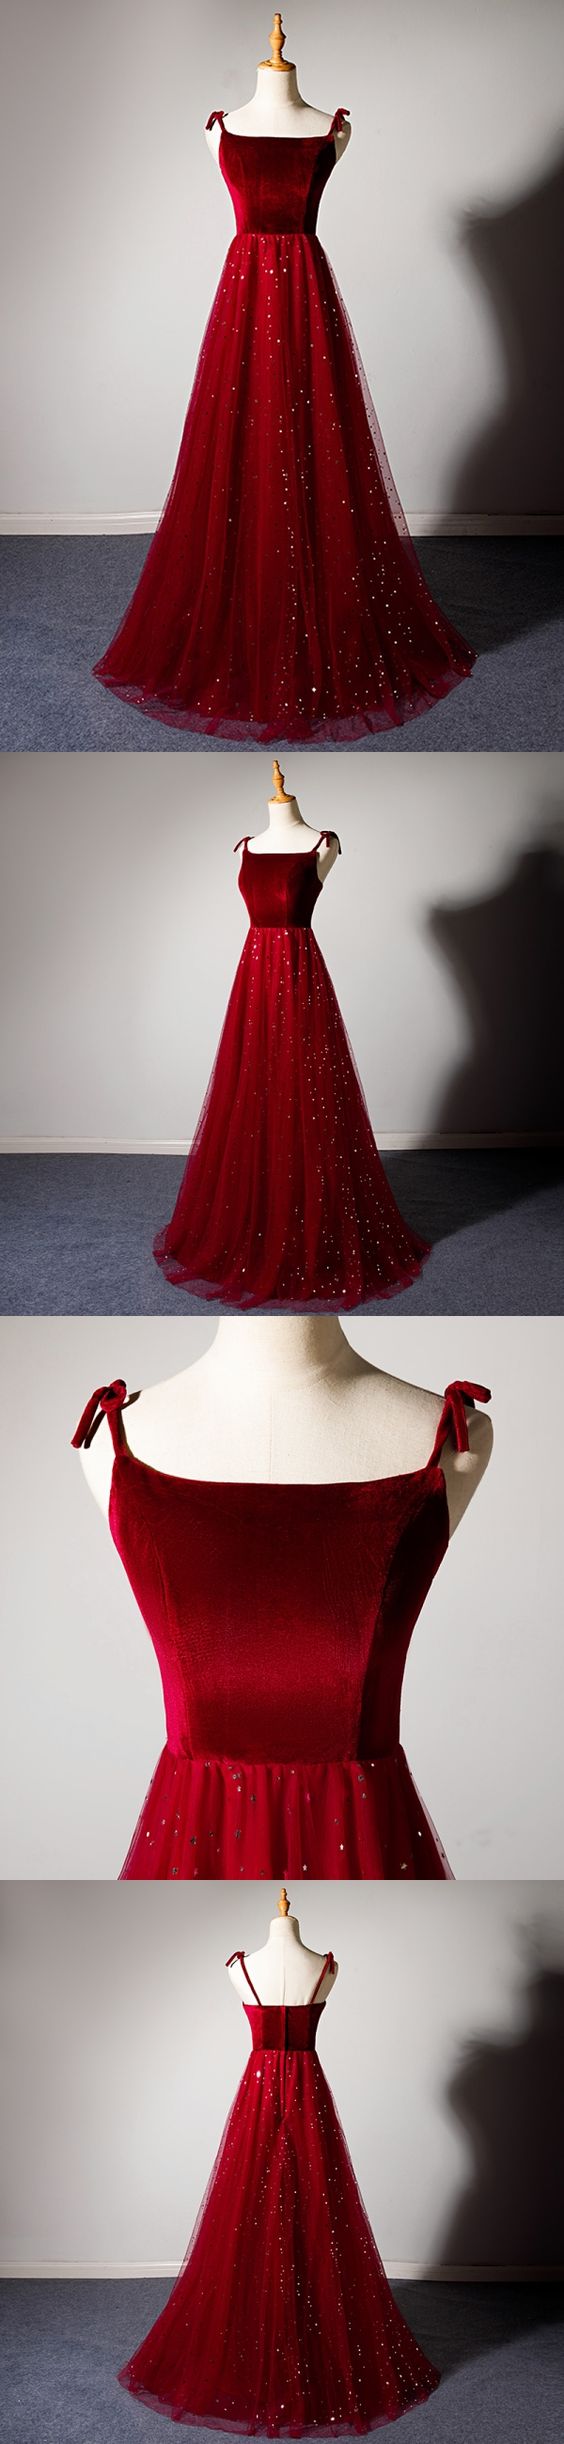 Sparkly Tulle Long Prom Dress A Line Spaghetti Straps Burgundy Prom/Evening Dress CD1433